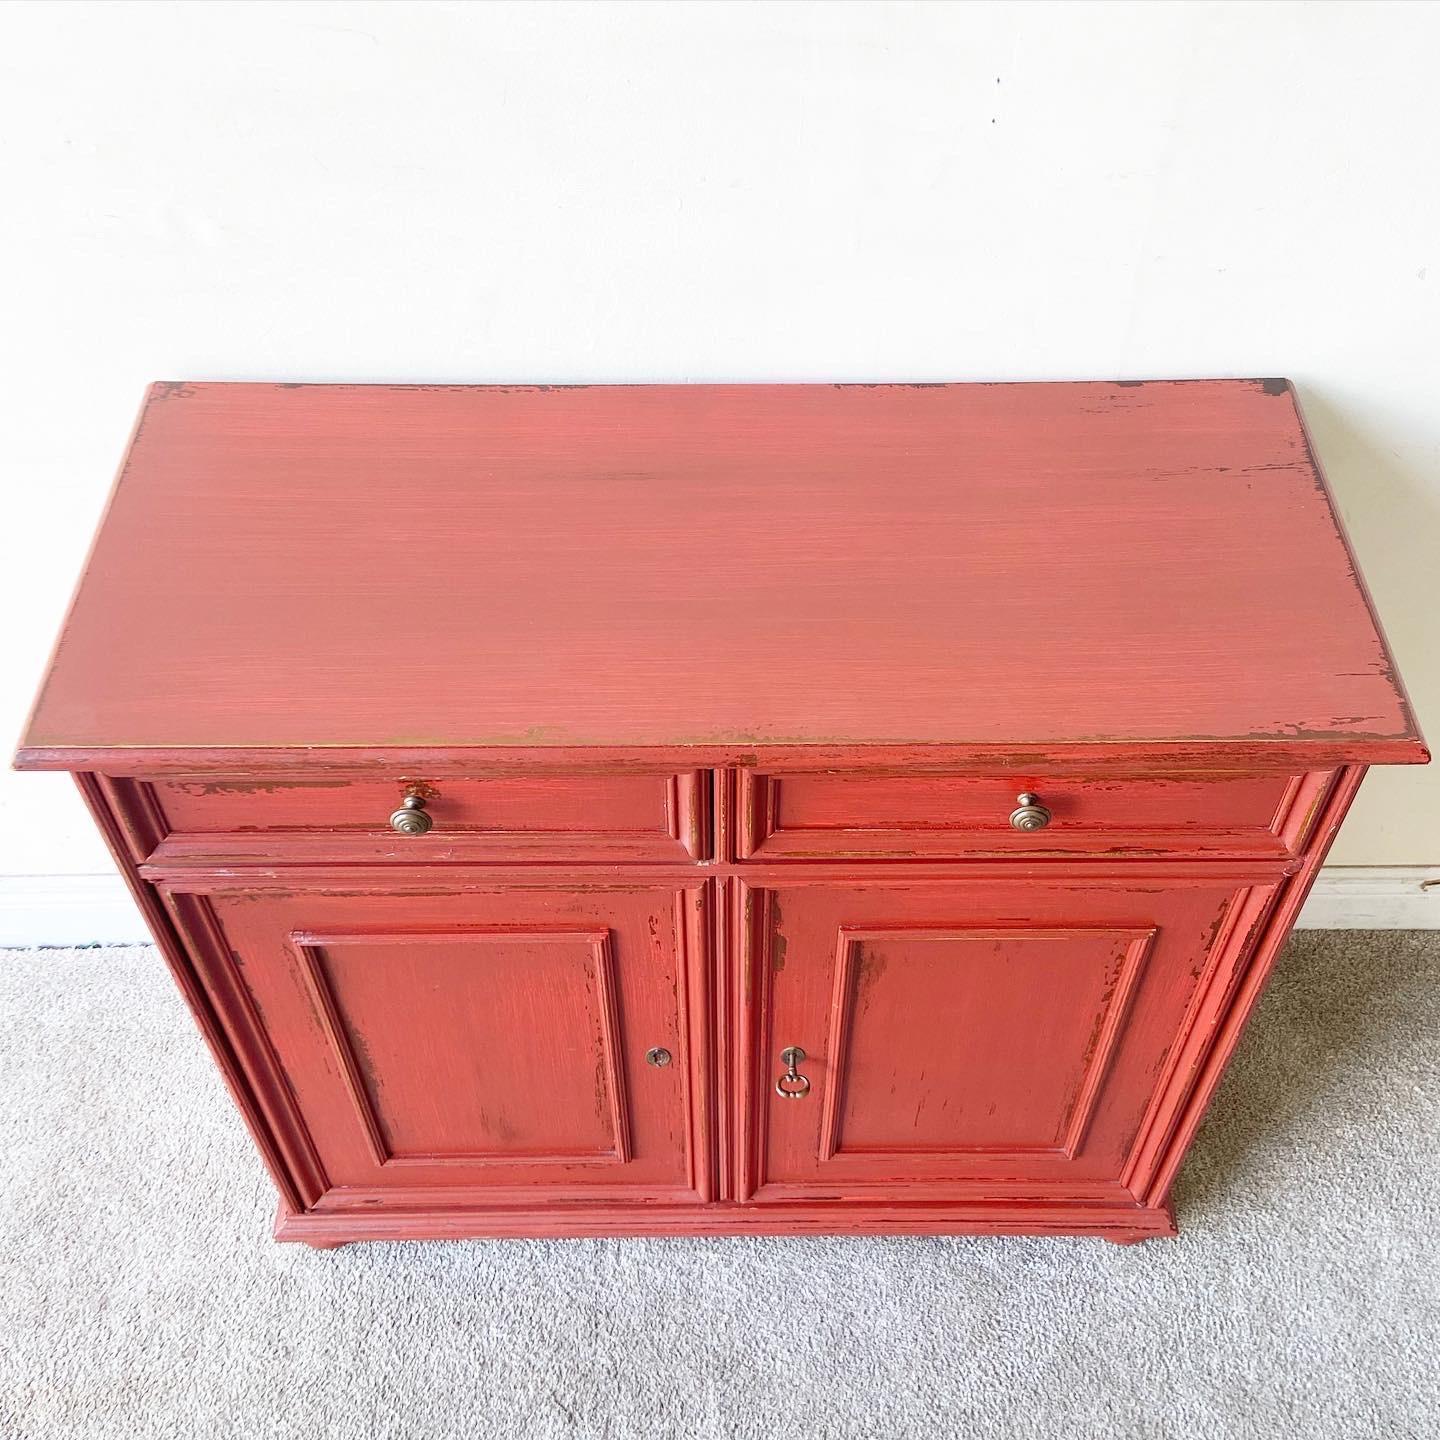 Exceptional Italian farmhouse sideboard by Buying & Design. Features a painted red distressed finish with 2 spacious drawers and shelving.
    